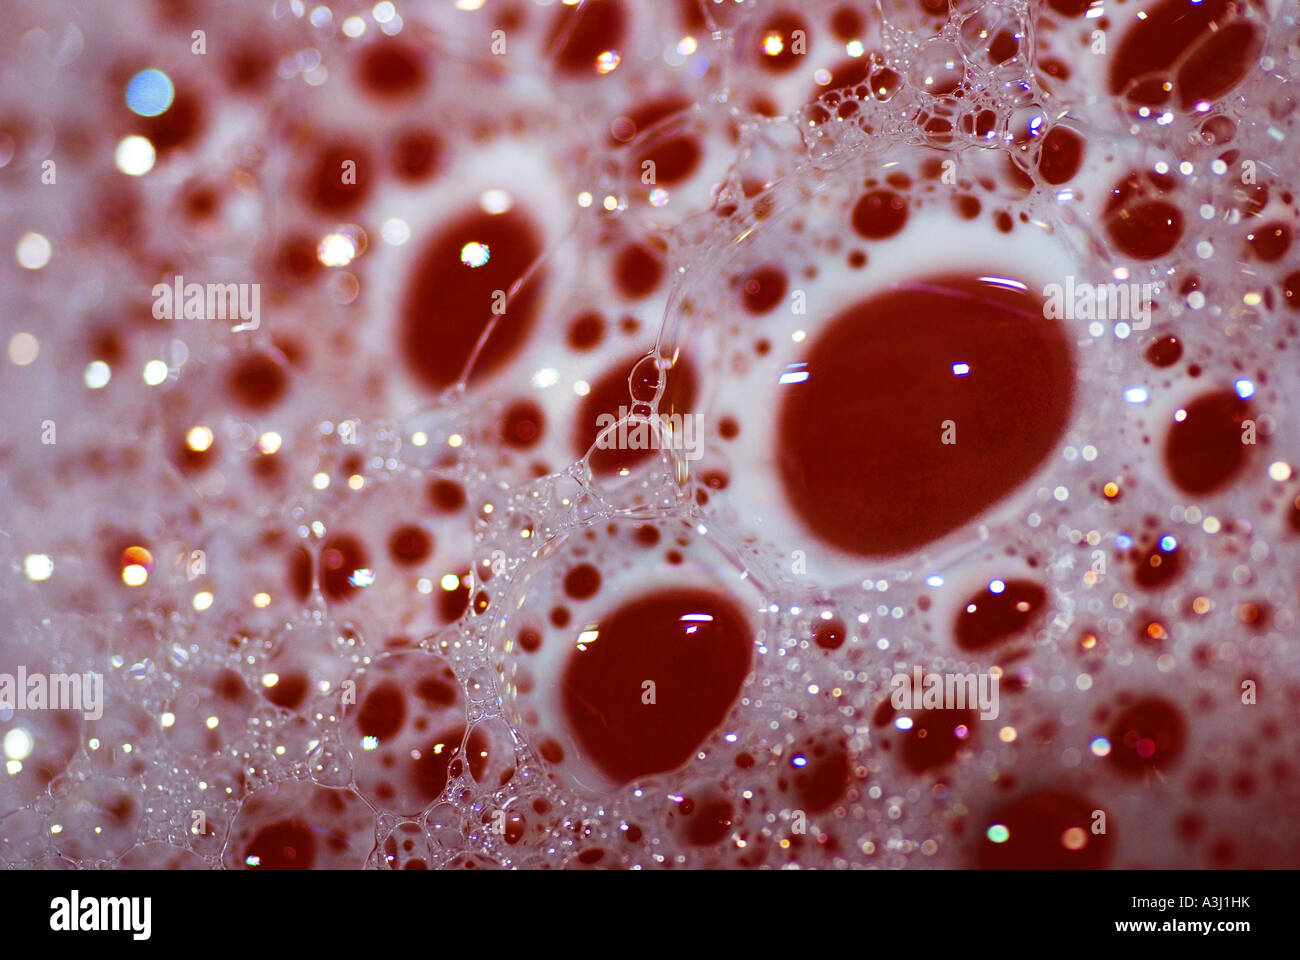 Red bathwater with bubbles Stock Photo